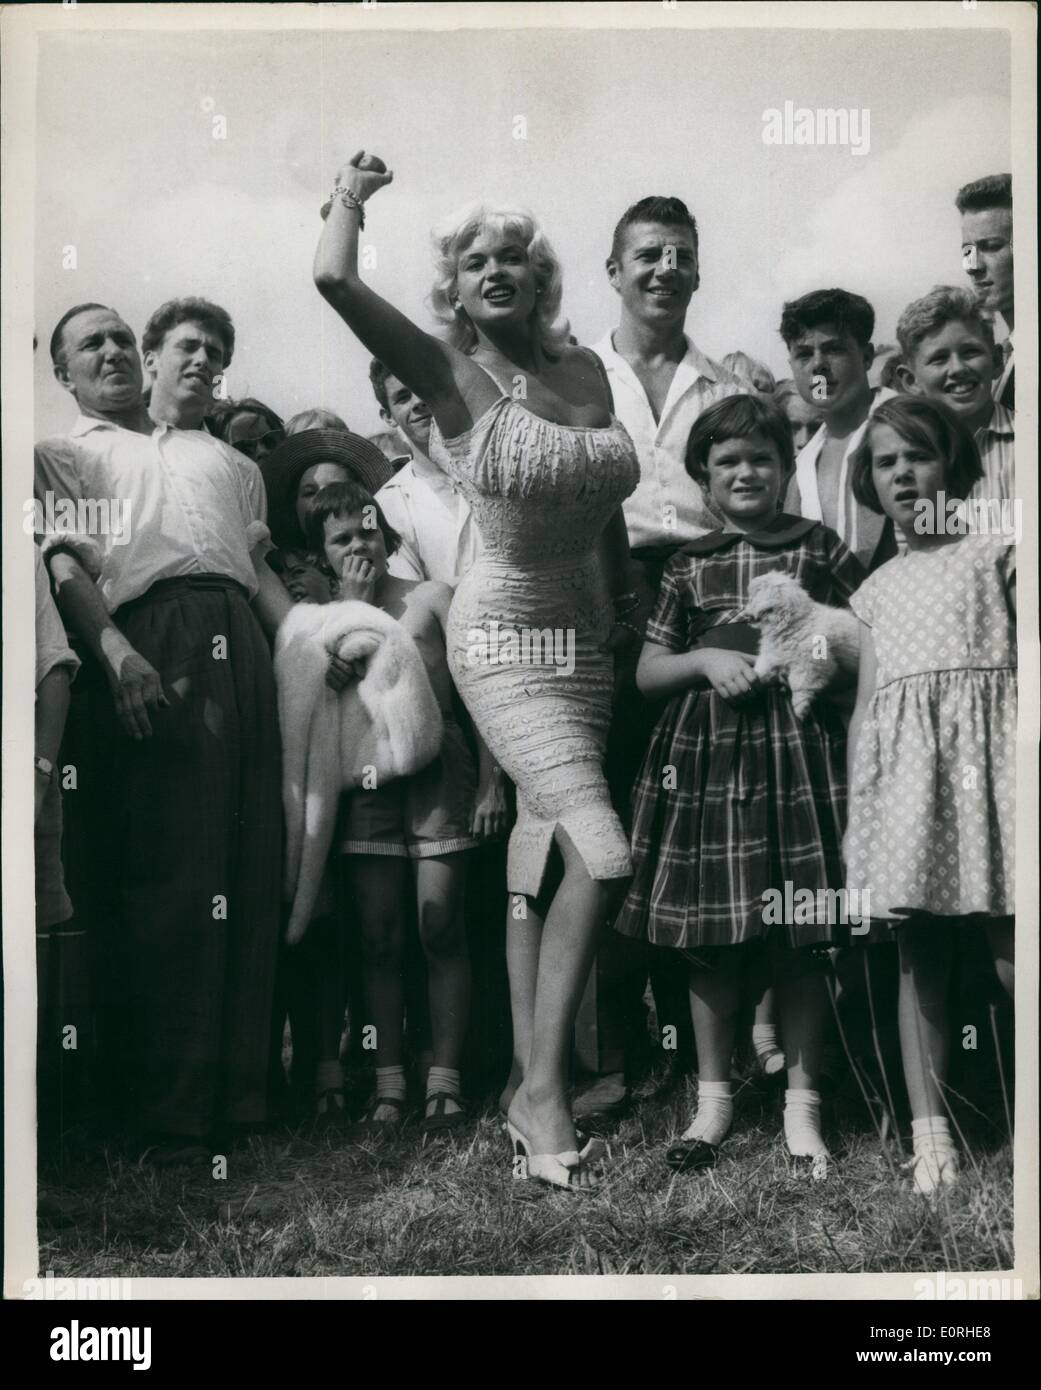 Aug. 08, 1959 - Jayne Mansfield Attends Garden Fete: American film-star Jayne Mansfield with her husband Micky Hargitay this afternoon attended a garden fete at Angmering-onsea in Sussex.The fete was to help raise funds for the nearby St. Bridget's - the home for the incurable sick, set up by Group Captain Leonard Cheshire V.C. Photo shows Jayne Mansfield her hand at Coconut shy, one of the many side shows at the fete. Stock Photo